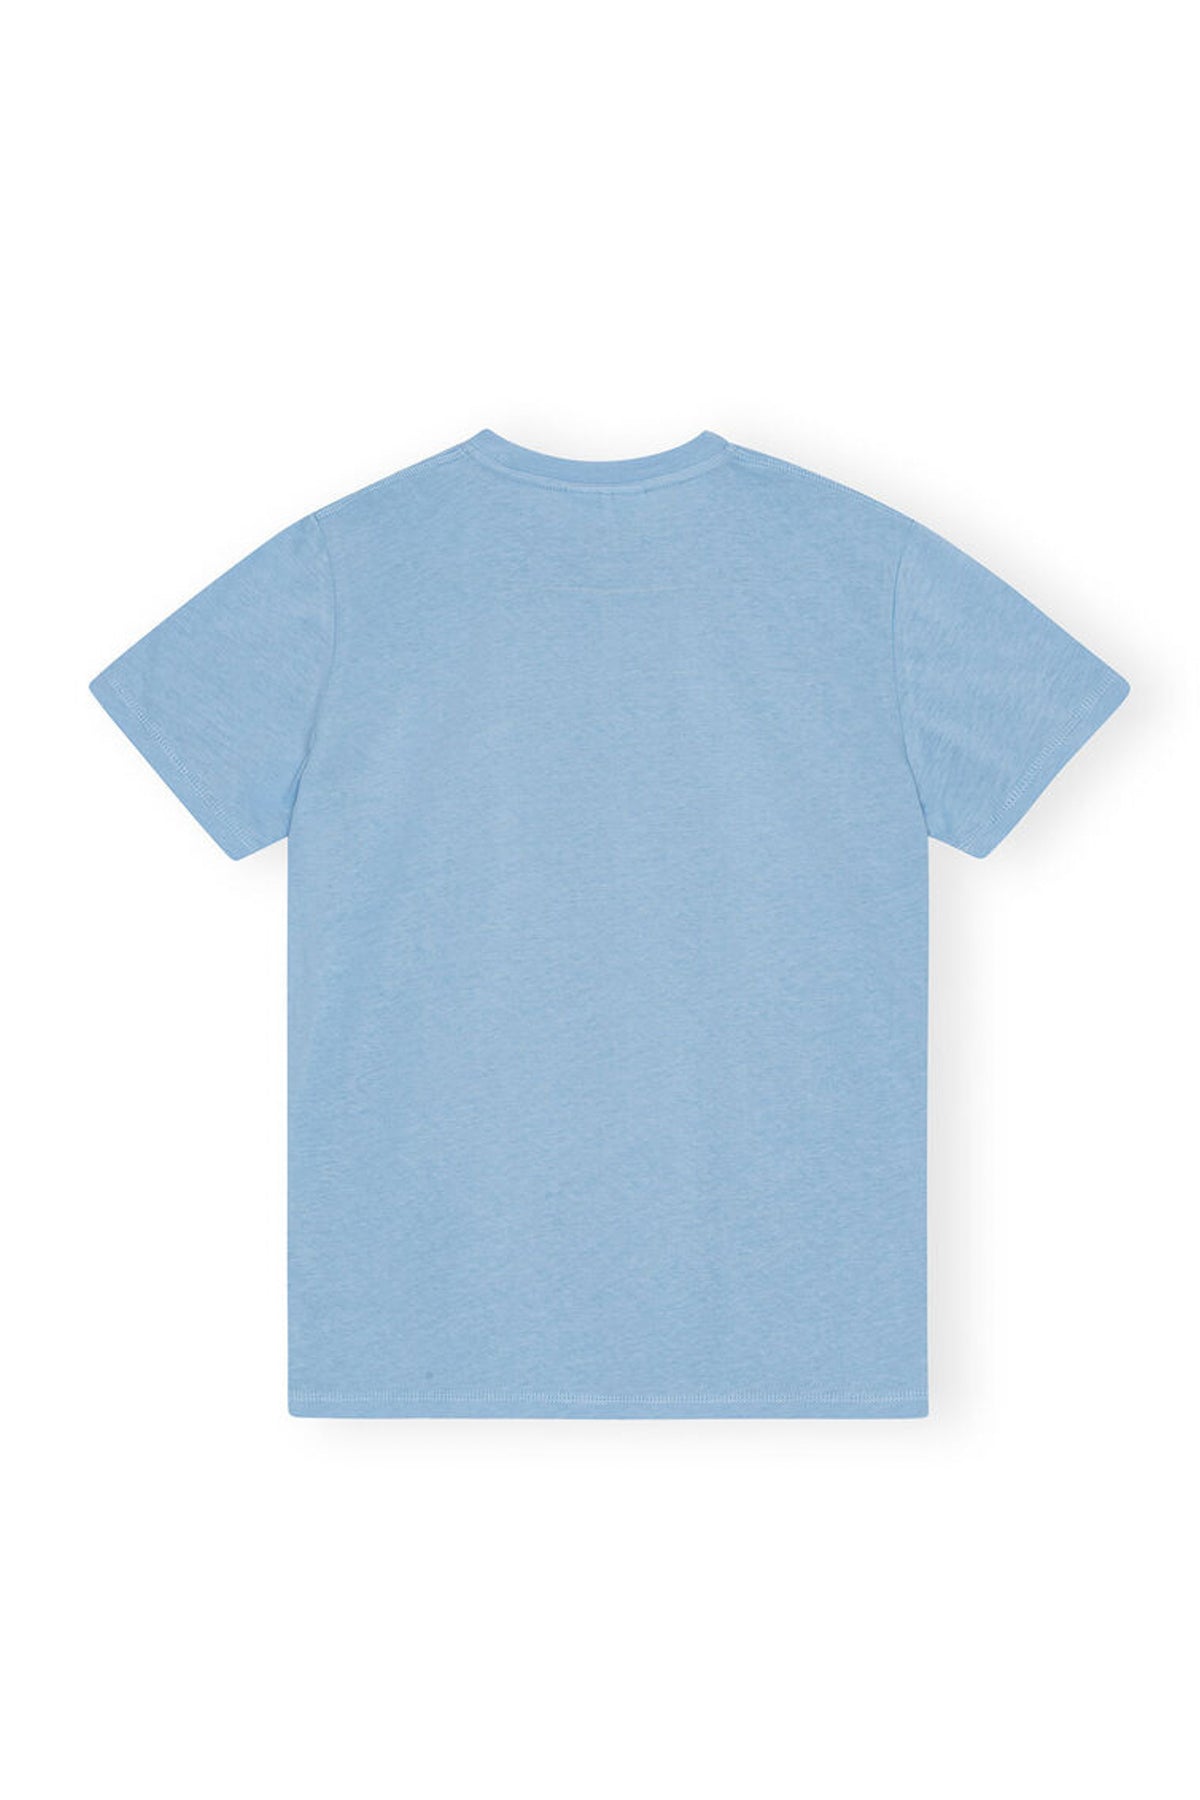 THIN JERSEY LOVECLUB RELAXED T-SHIRT / BLU